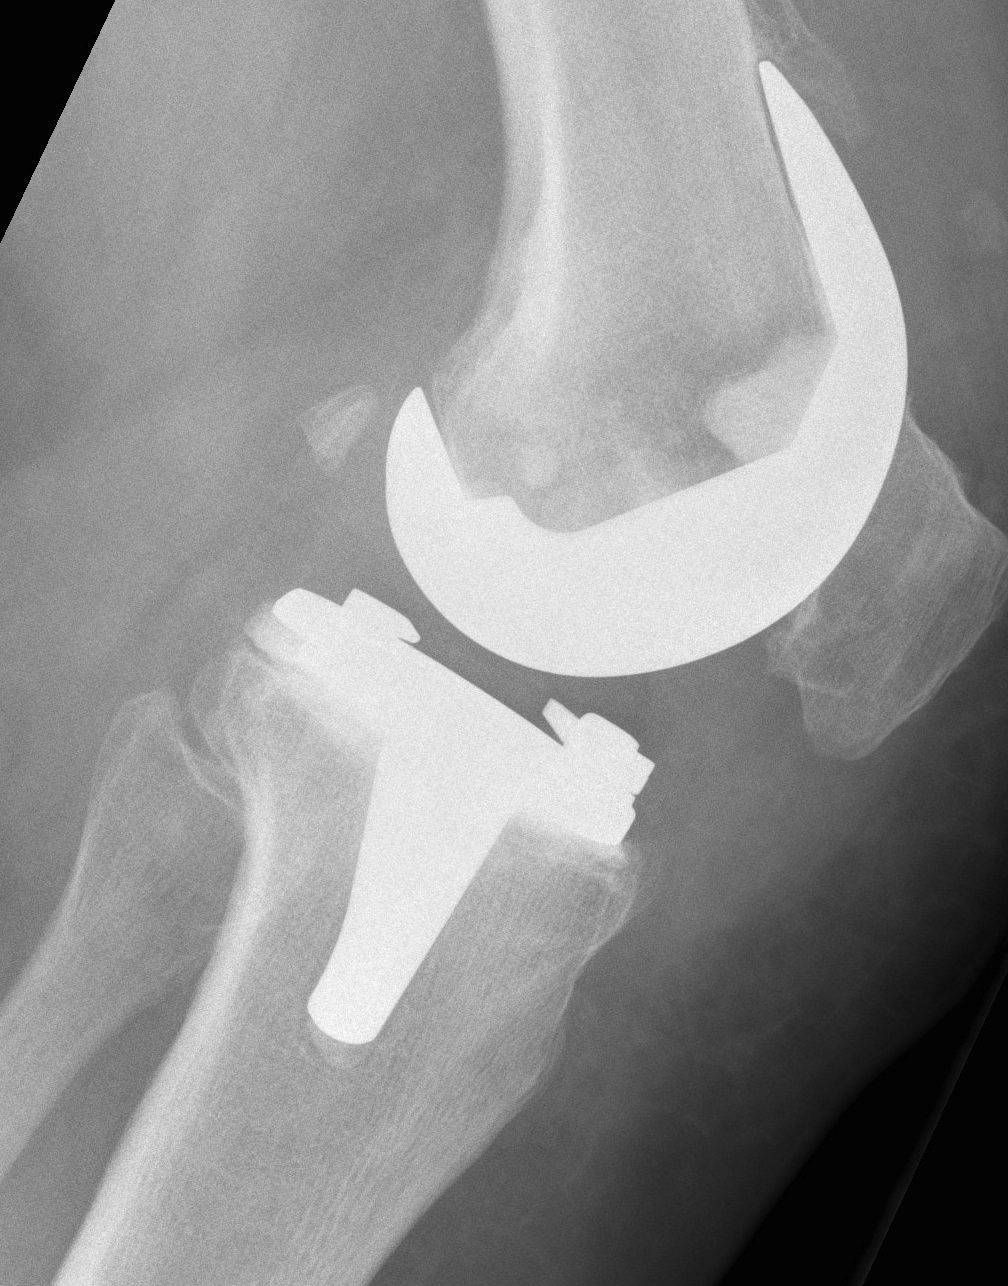 Revision TKR AORI Tibia Type 1 Lateral